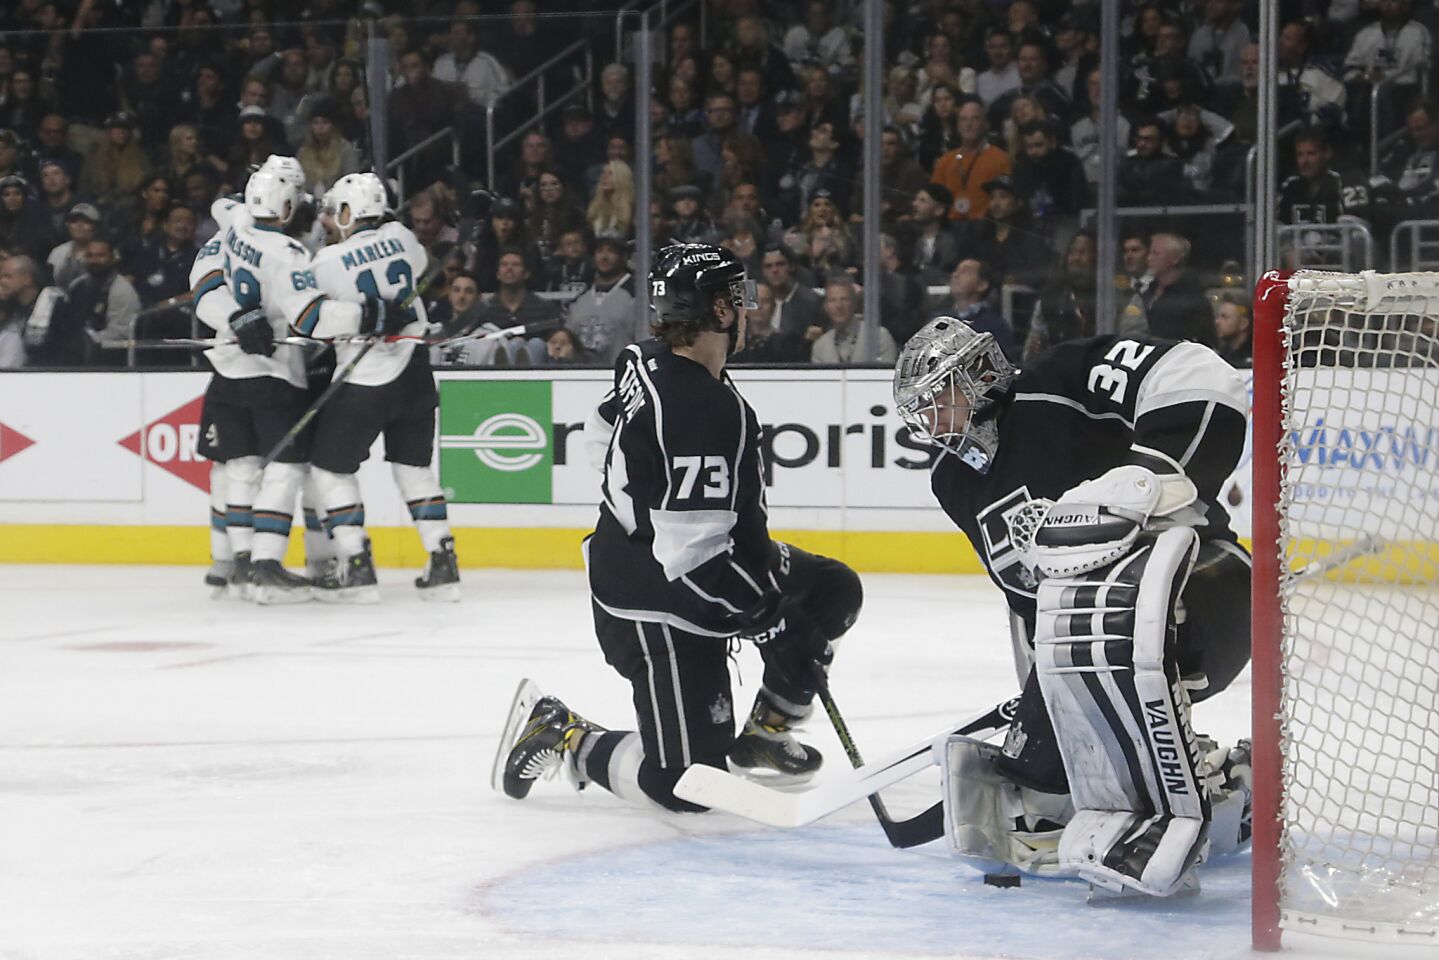 Kings goalie Jonathan Quick and forward Tyler Toffoli hang their heads after allowing a third period goal to Sharks forward Joonas Donskoi on April 22.